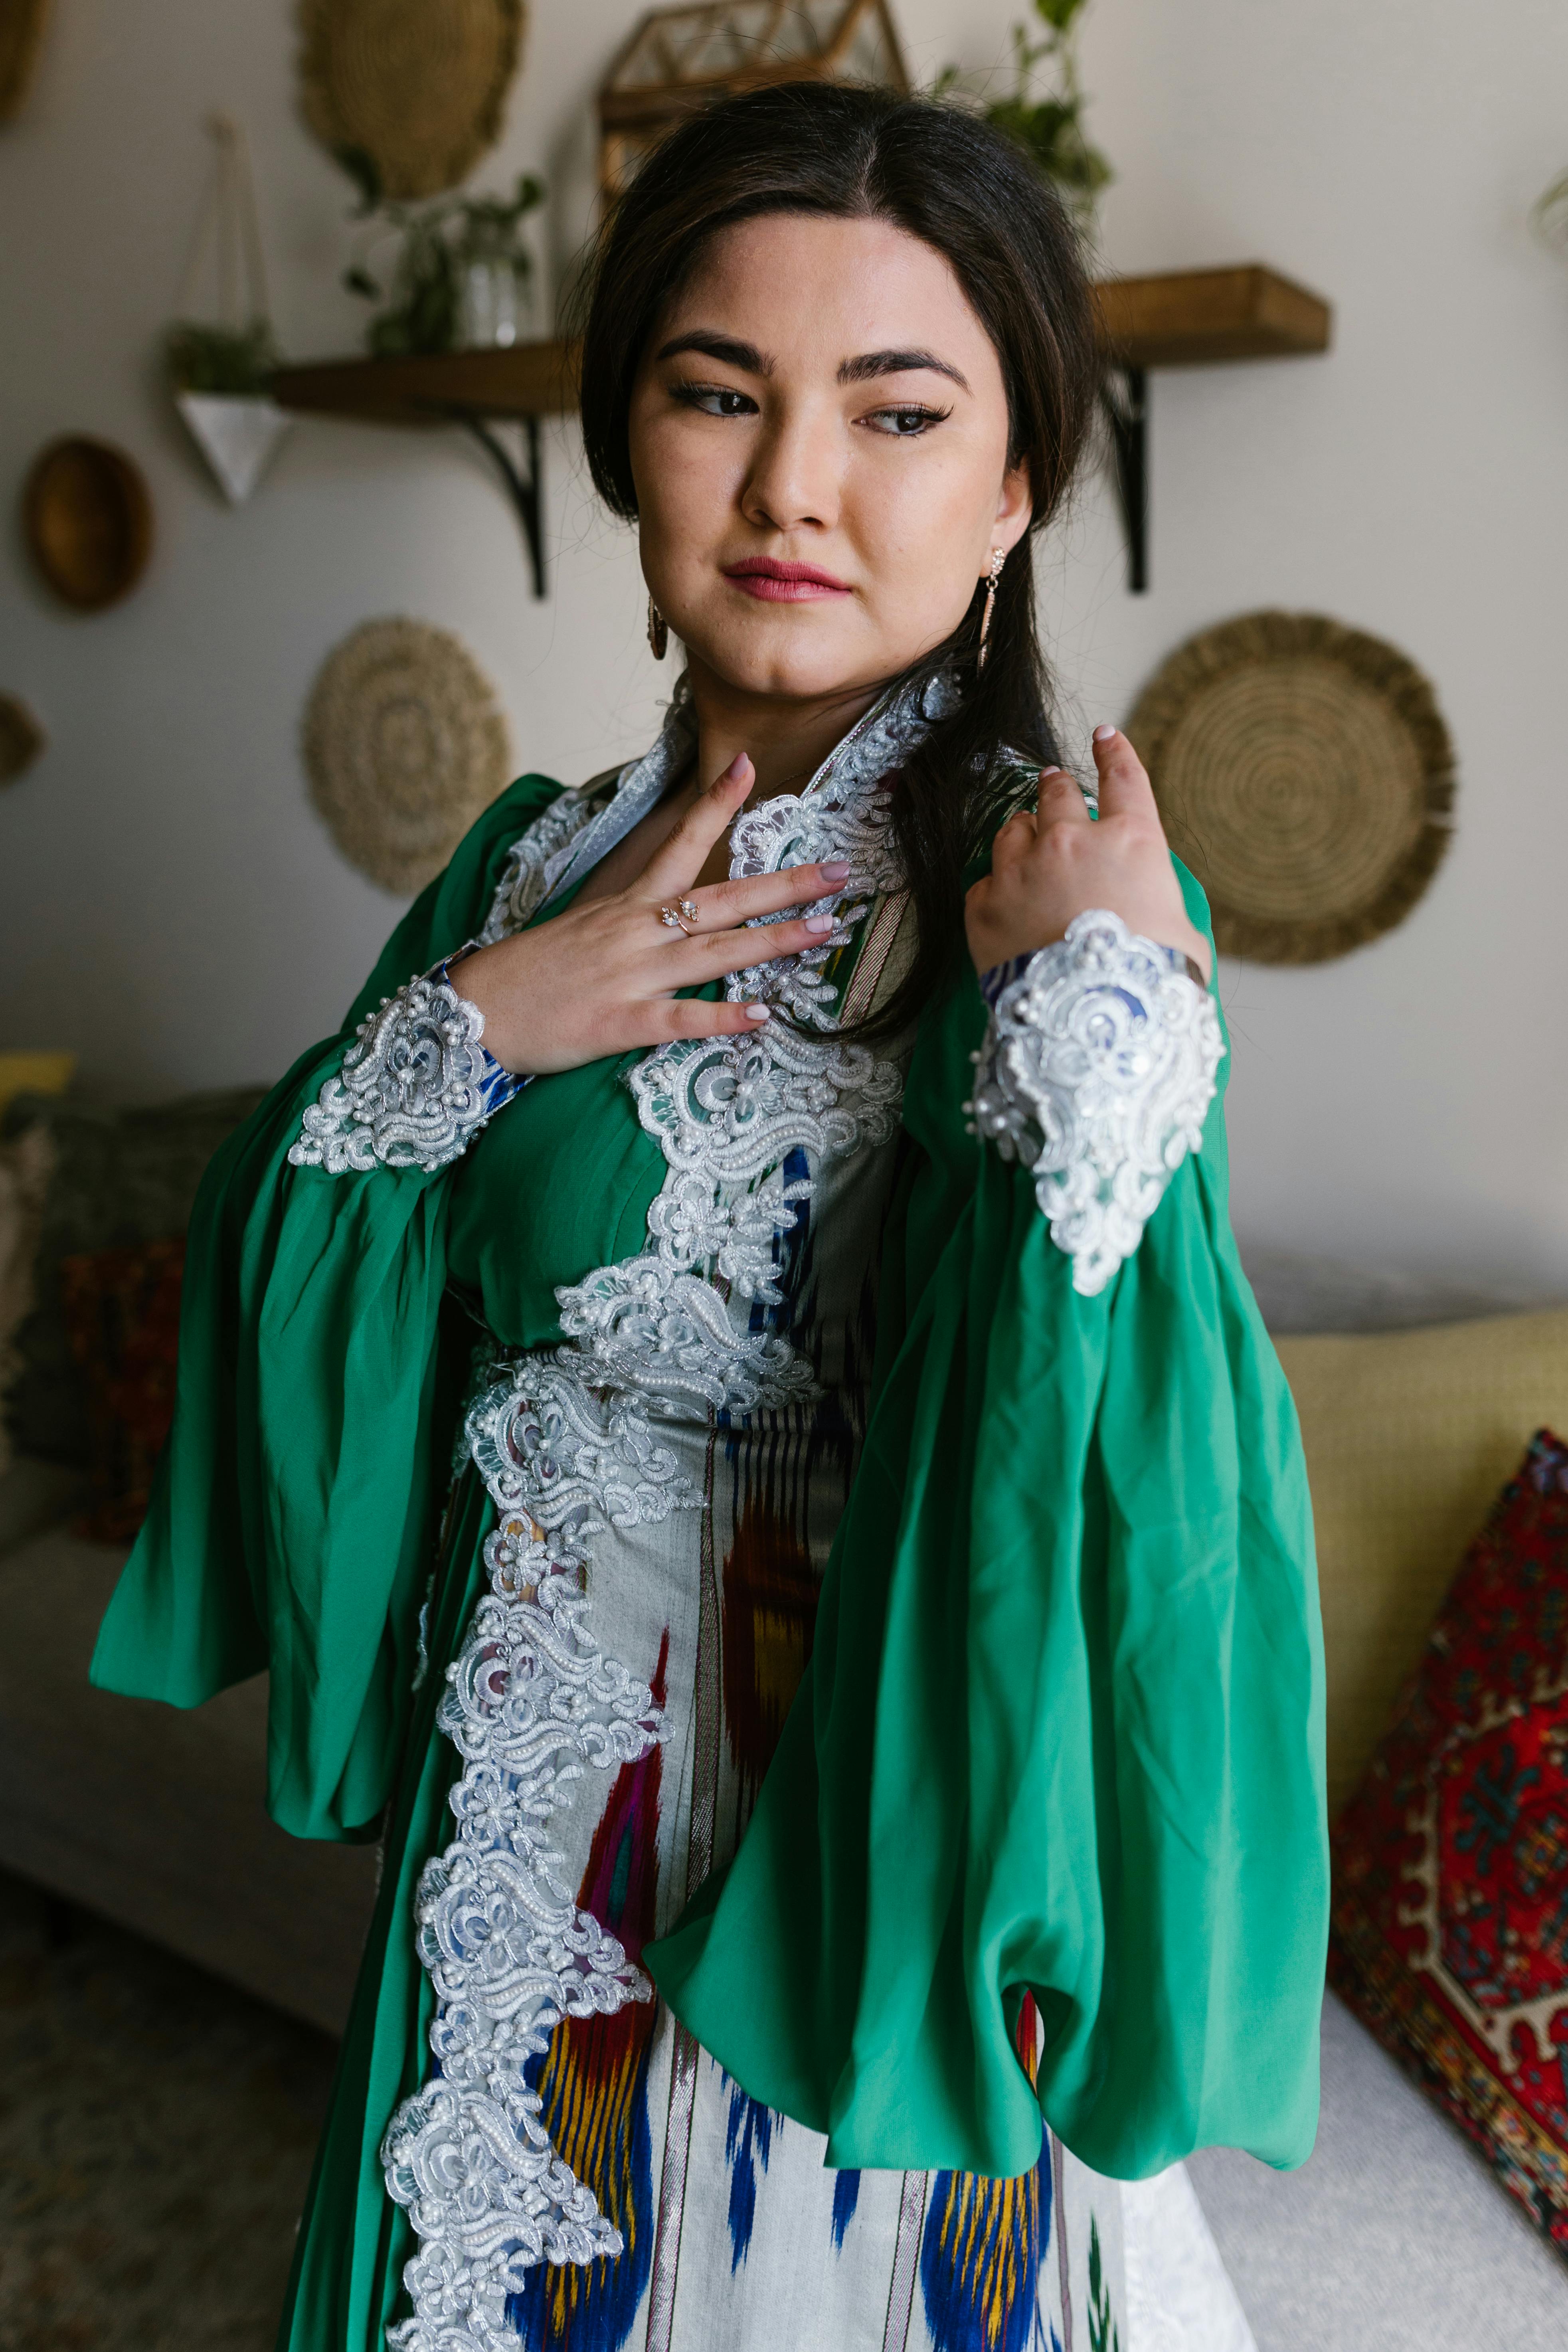 woman in green and white traditional dress